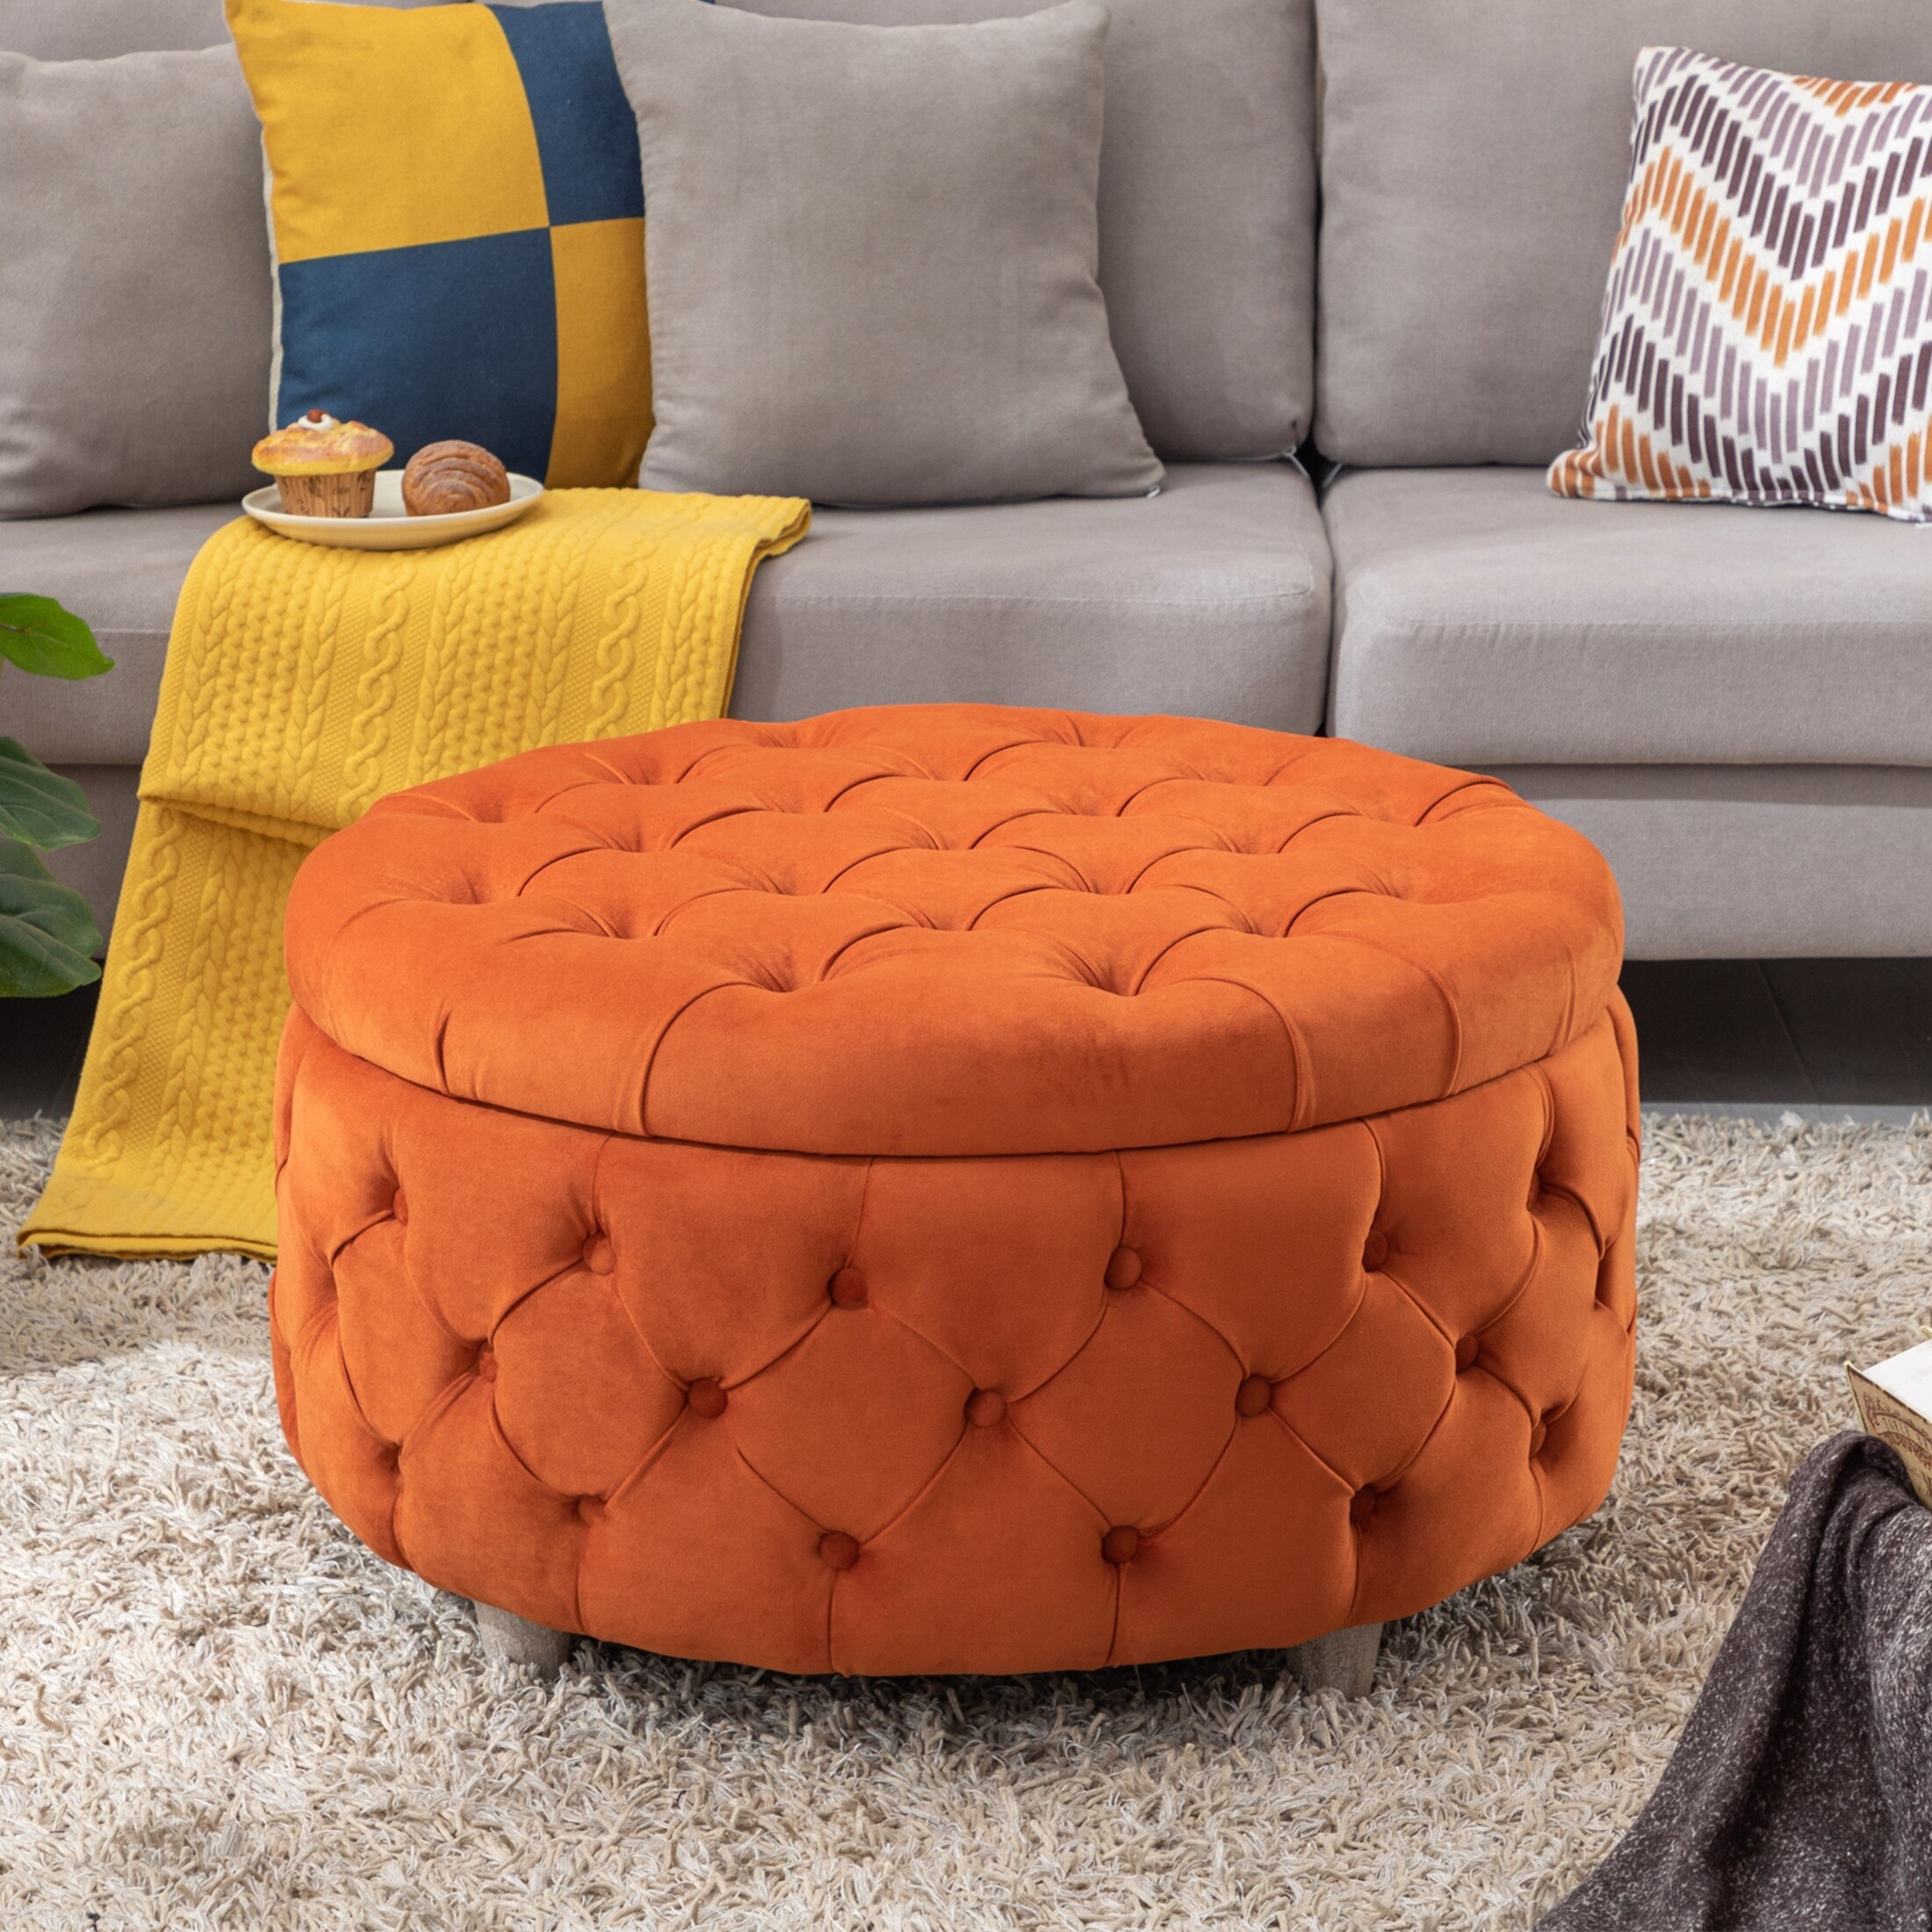 Belleze Square Ottoman Foot Rest with Rolling Wheels - On Sale